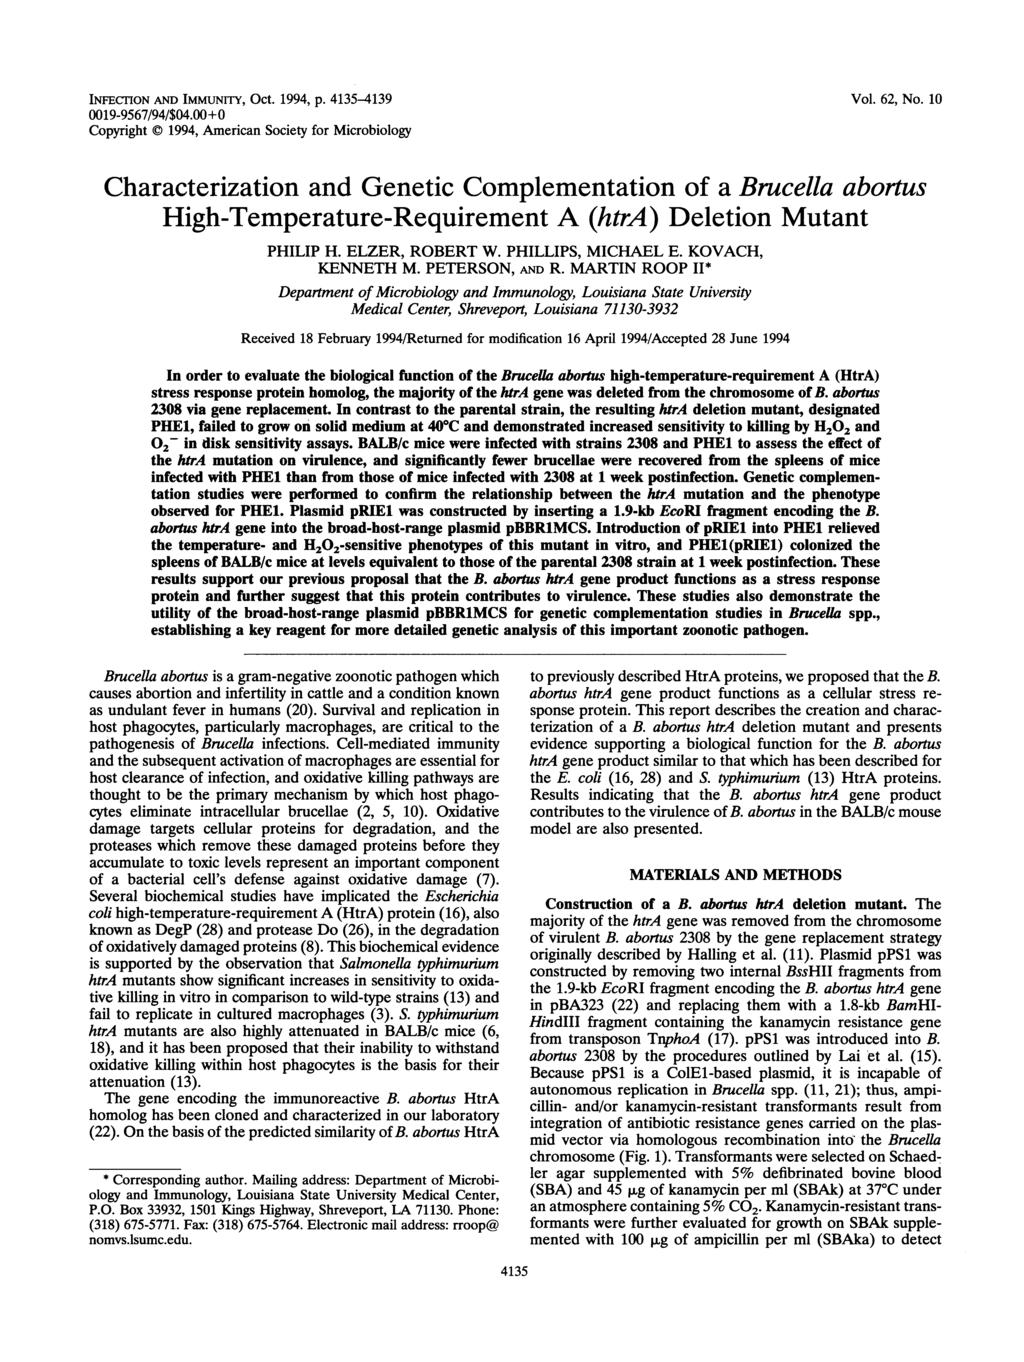 INFECrION AND IMMUNITY, Oct. 1994, p. 4135-4139 0019-9567/94/$04.00+0 Copyright 1994, American Society for Microbiology Vol. 62, No.